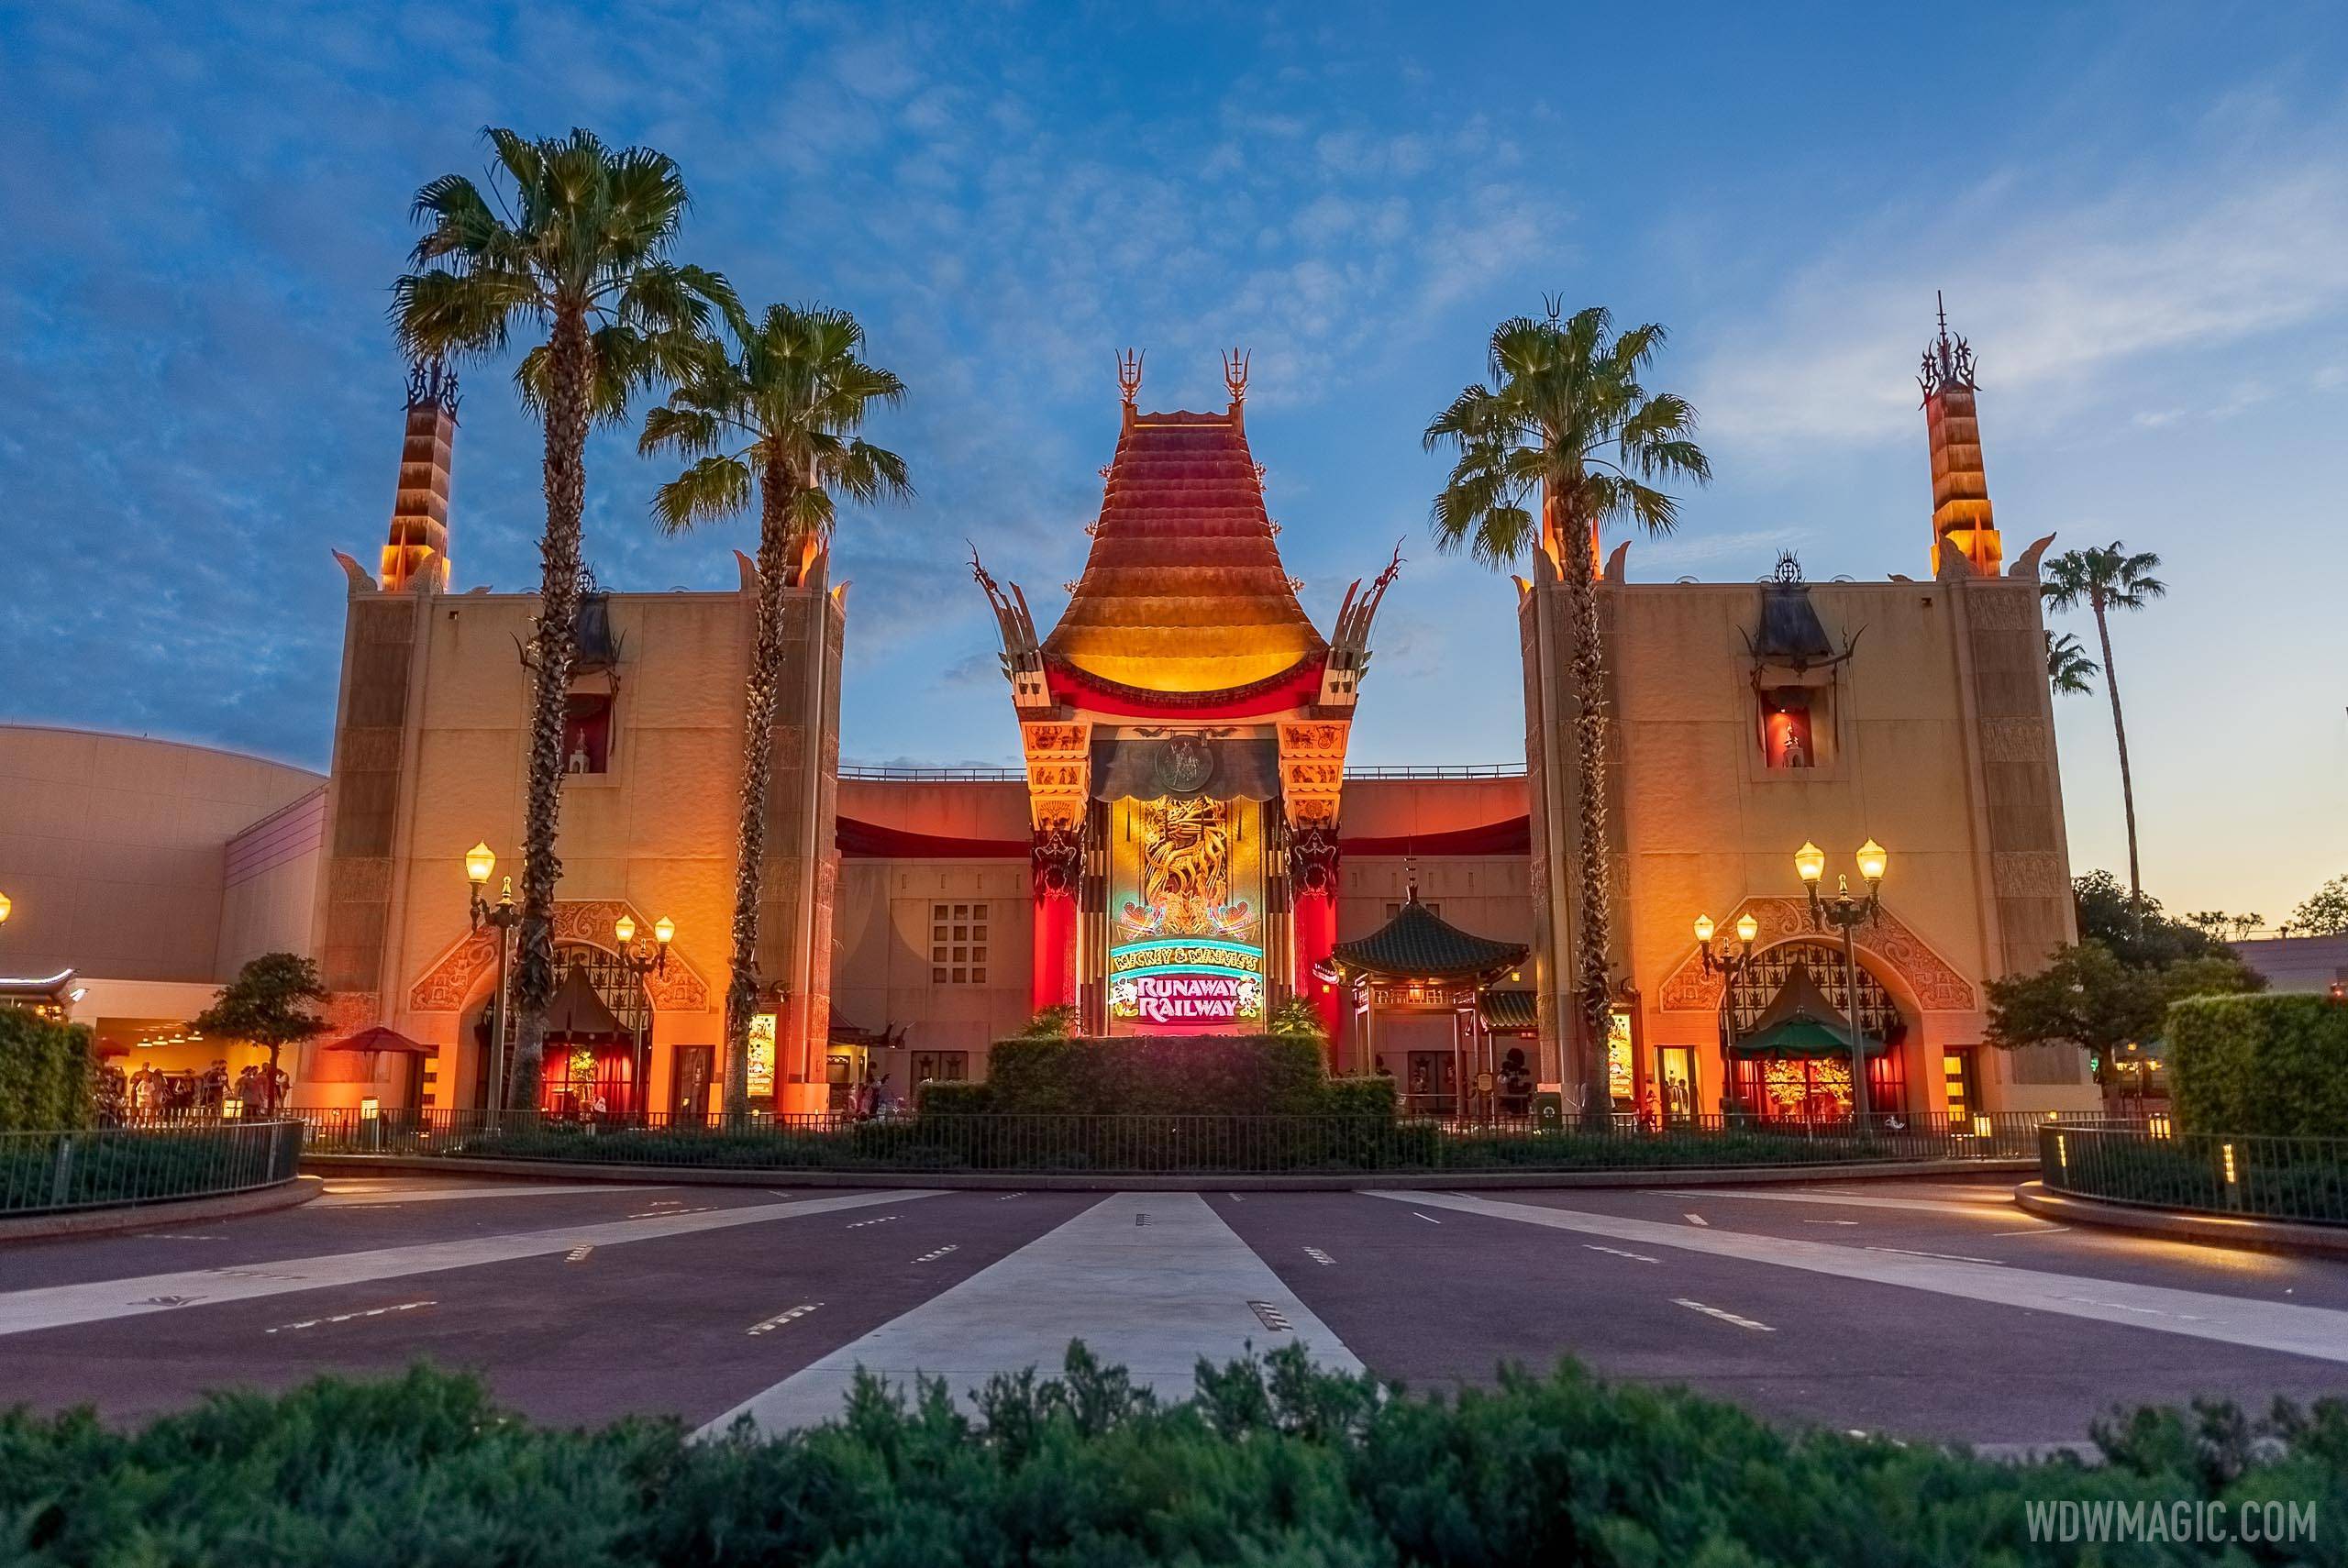 Second date sells out for 'Disney After Hours' event at Disney's Hollywood Studios